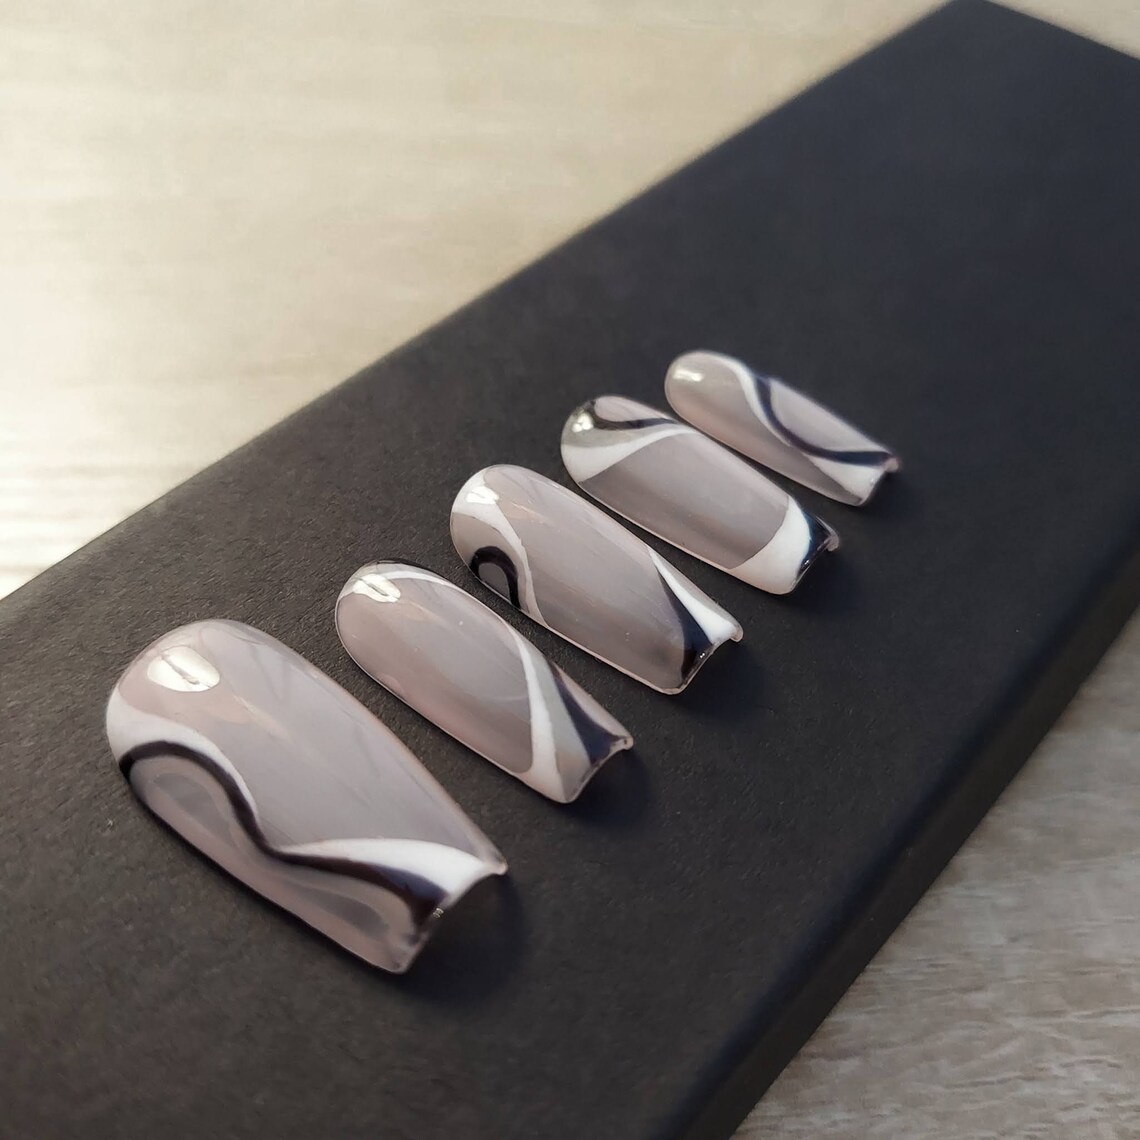 Black and White Negative Space Press on Nails Coffin Shape - Etsy